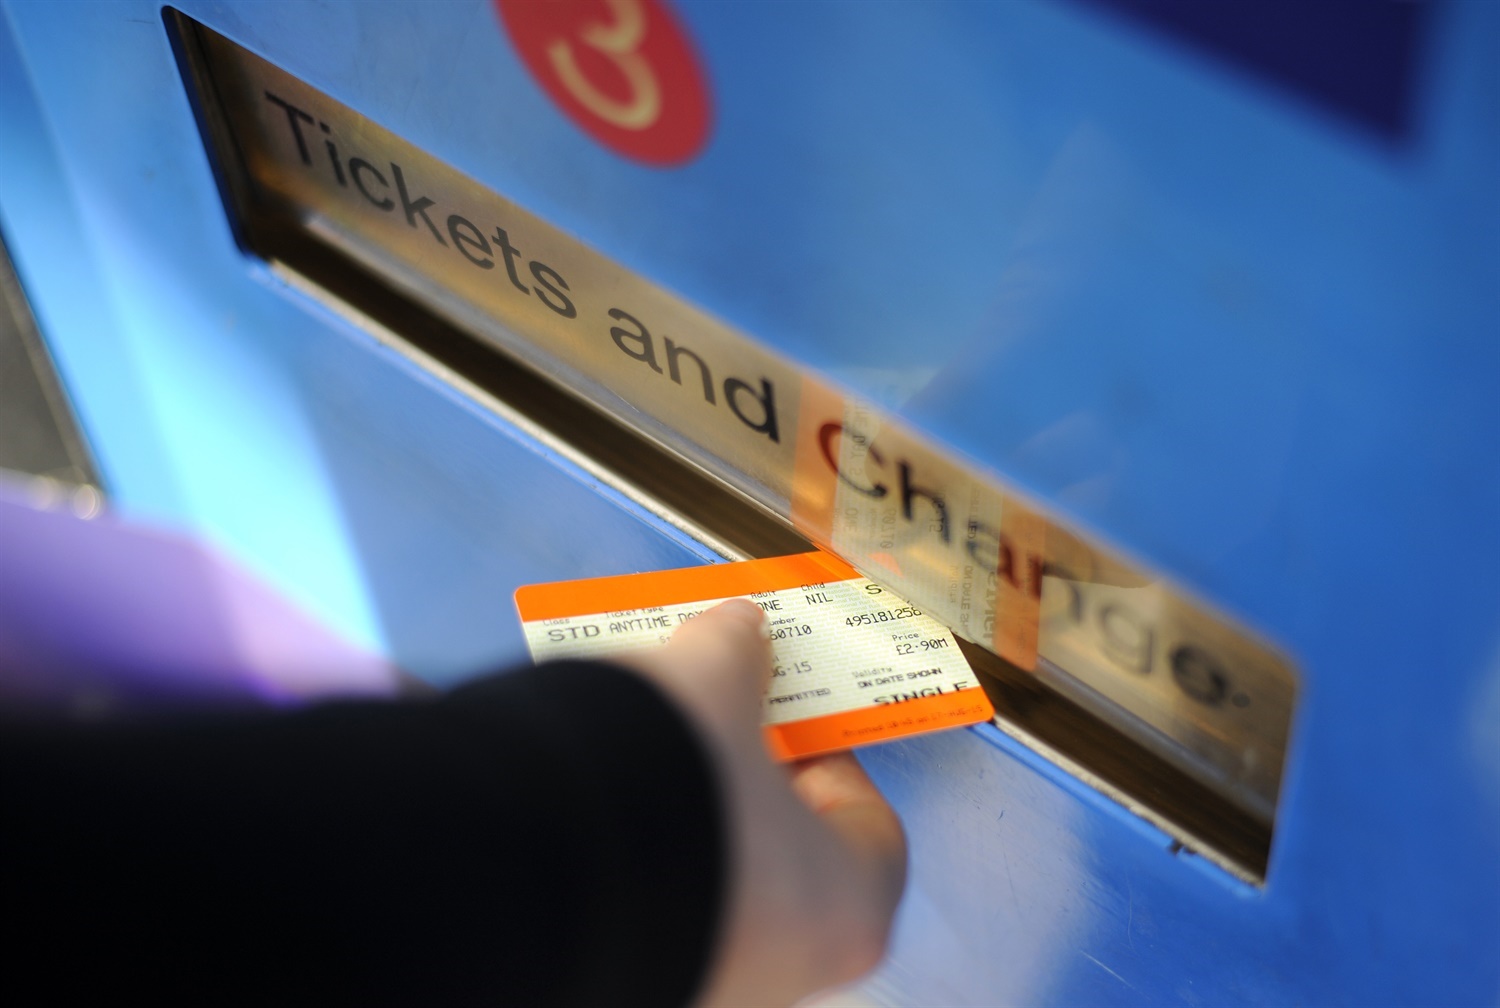 Rail leaders call summit to discuss ticketing issues